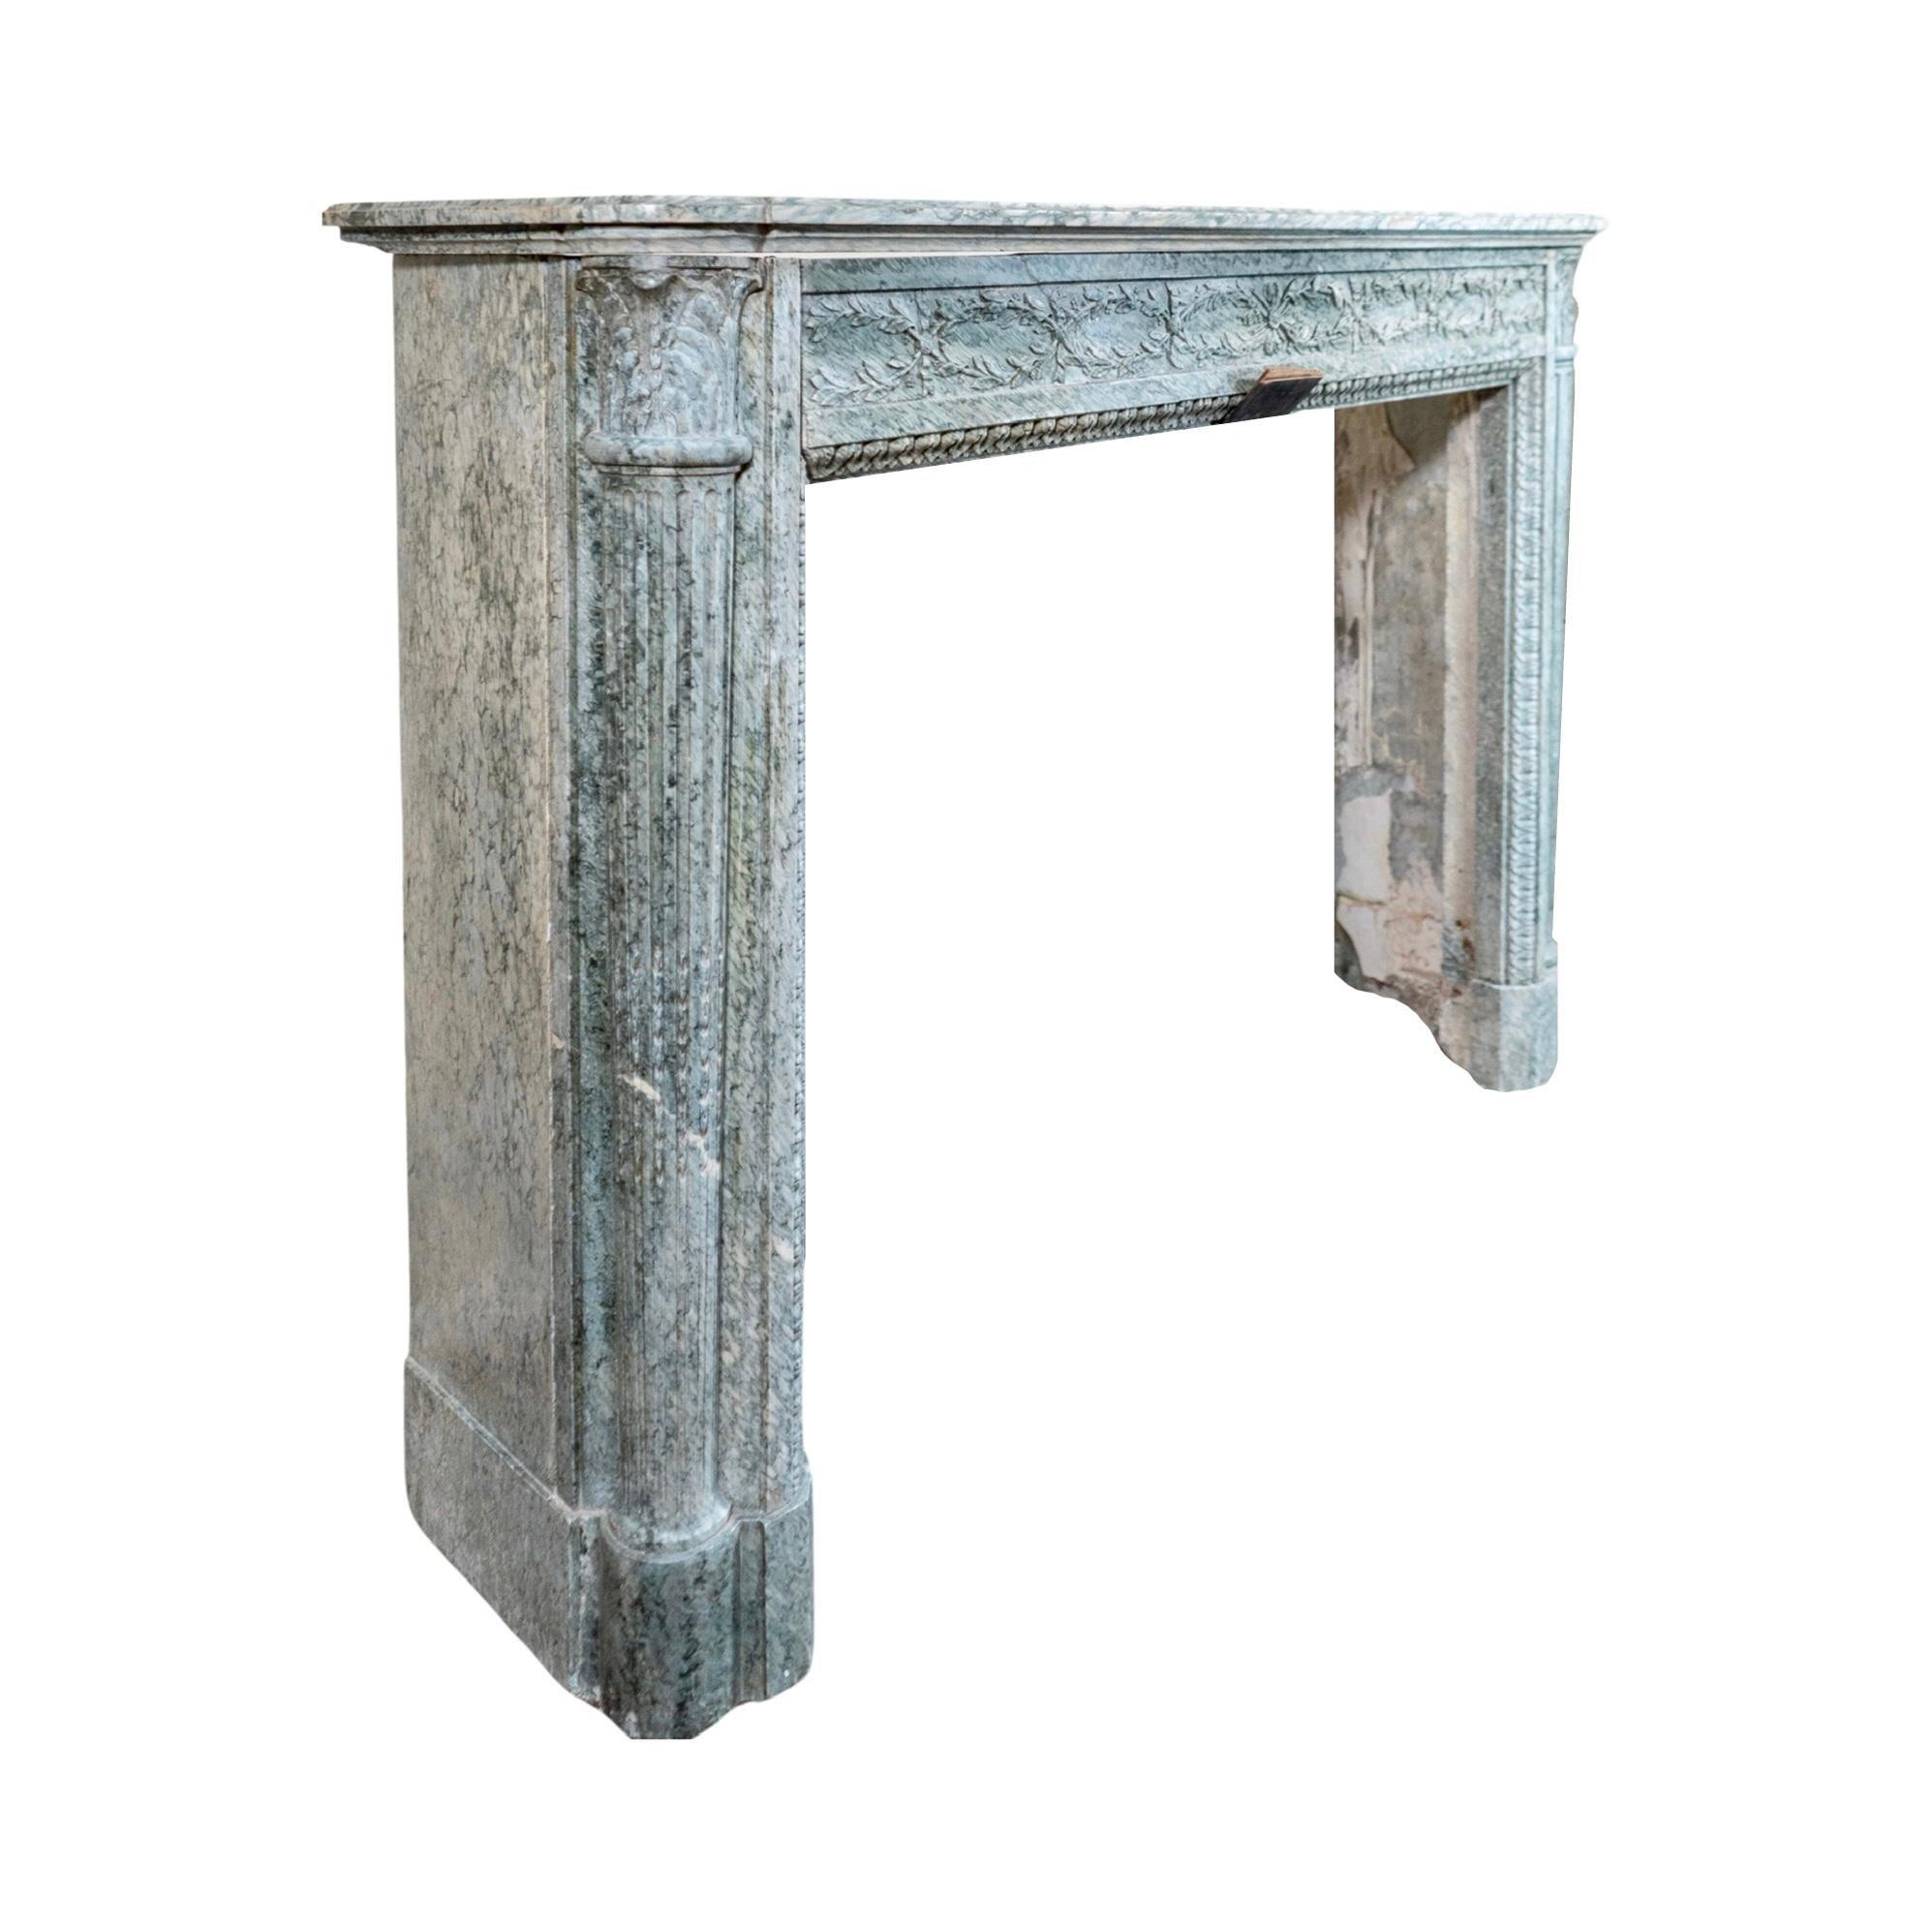 This French Marble Mantel is perfect for completing any traditional look. From the 18th century. It is made out of Estours Green Marble from France, in an emerald green color. Carving designs along the legs and center top level add a touch of